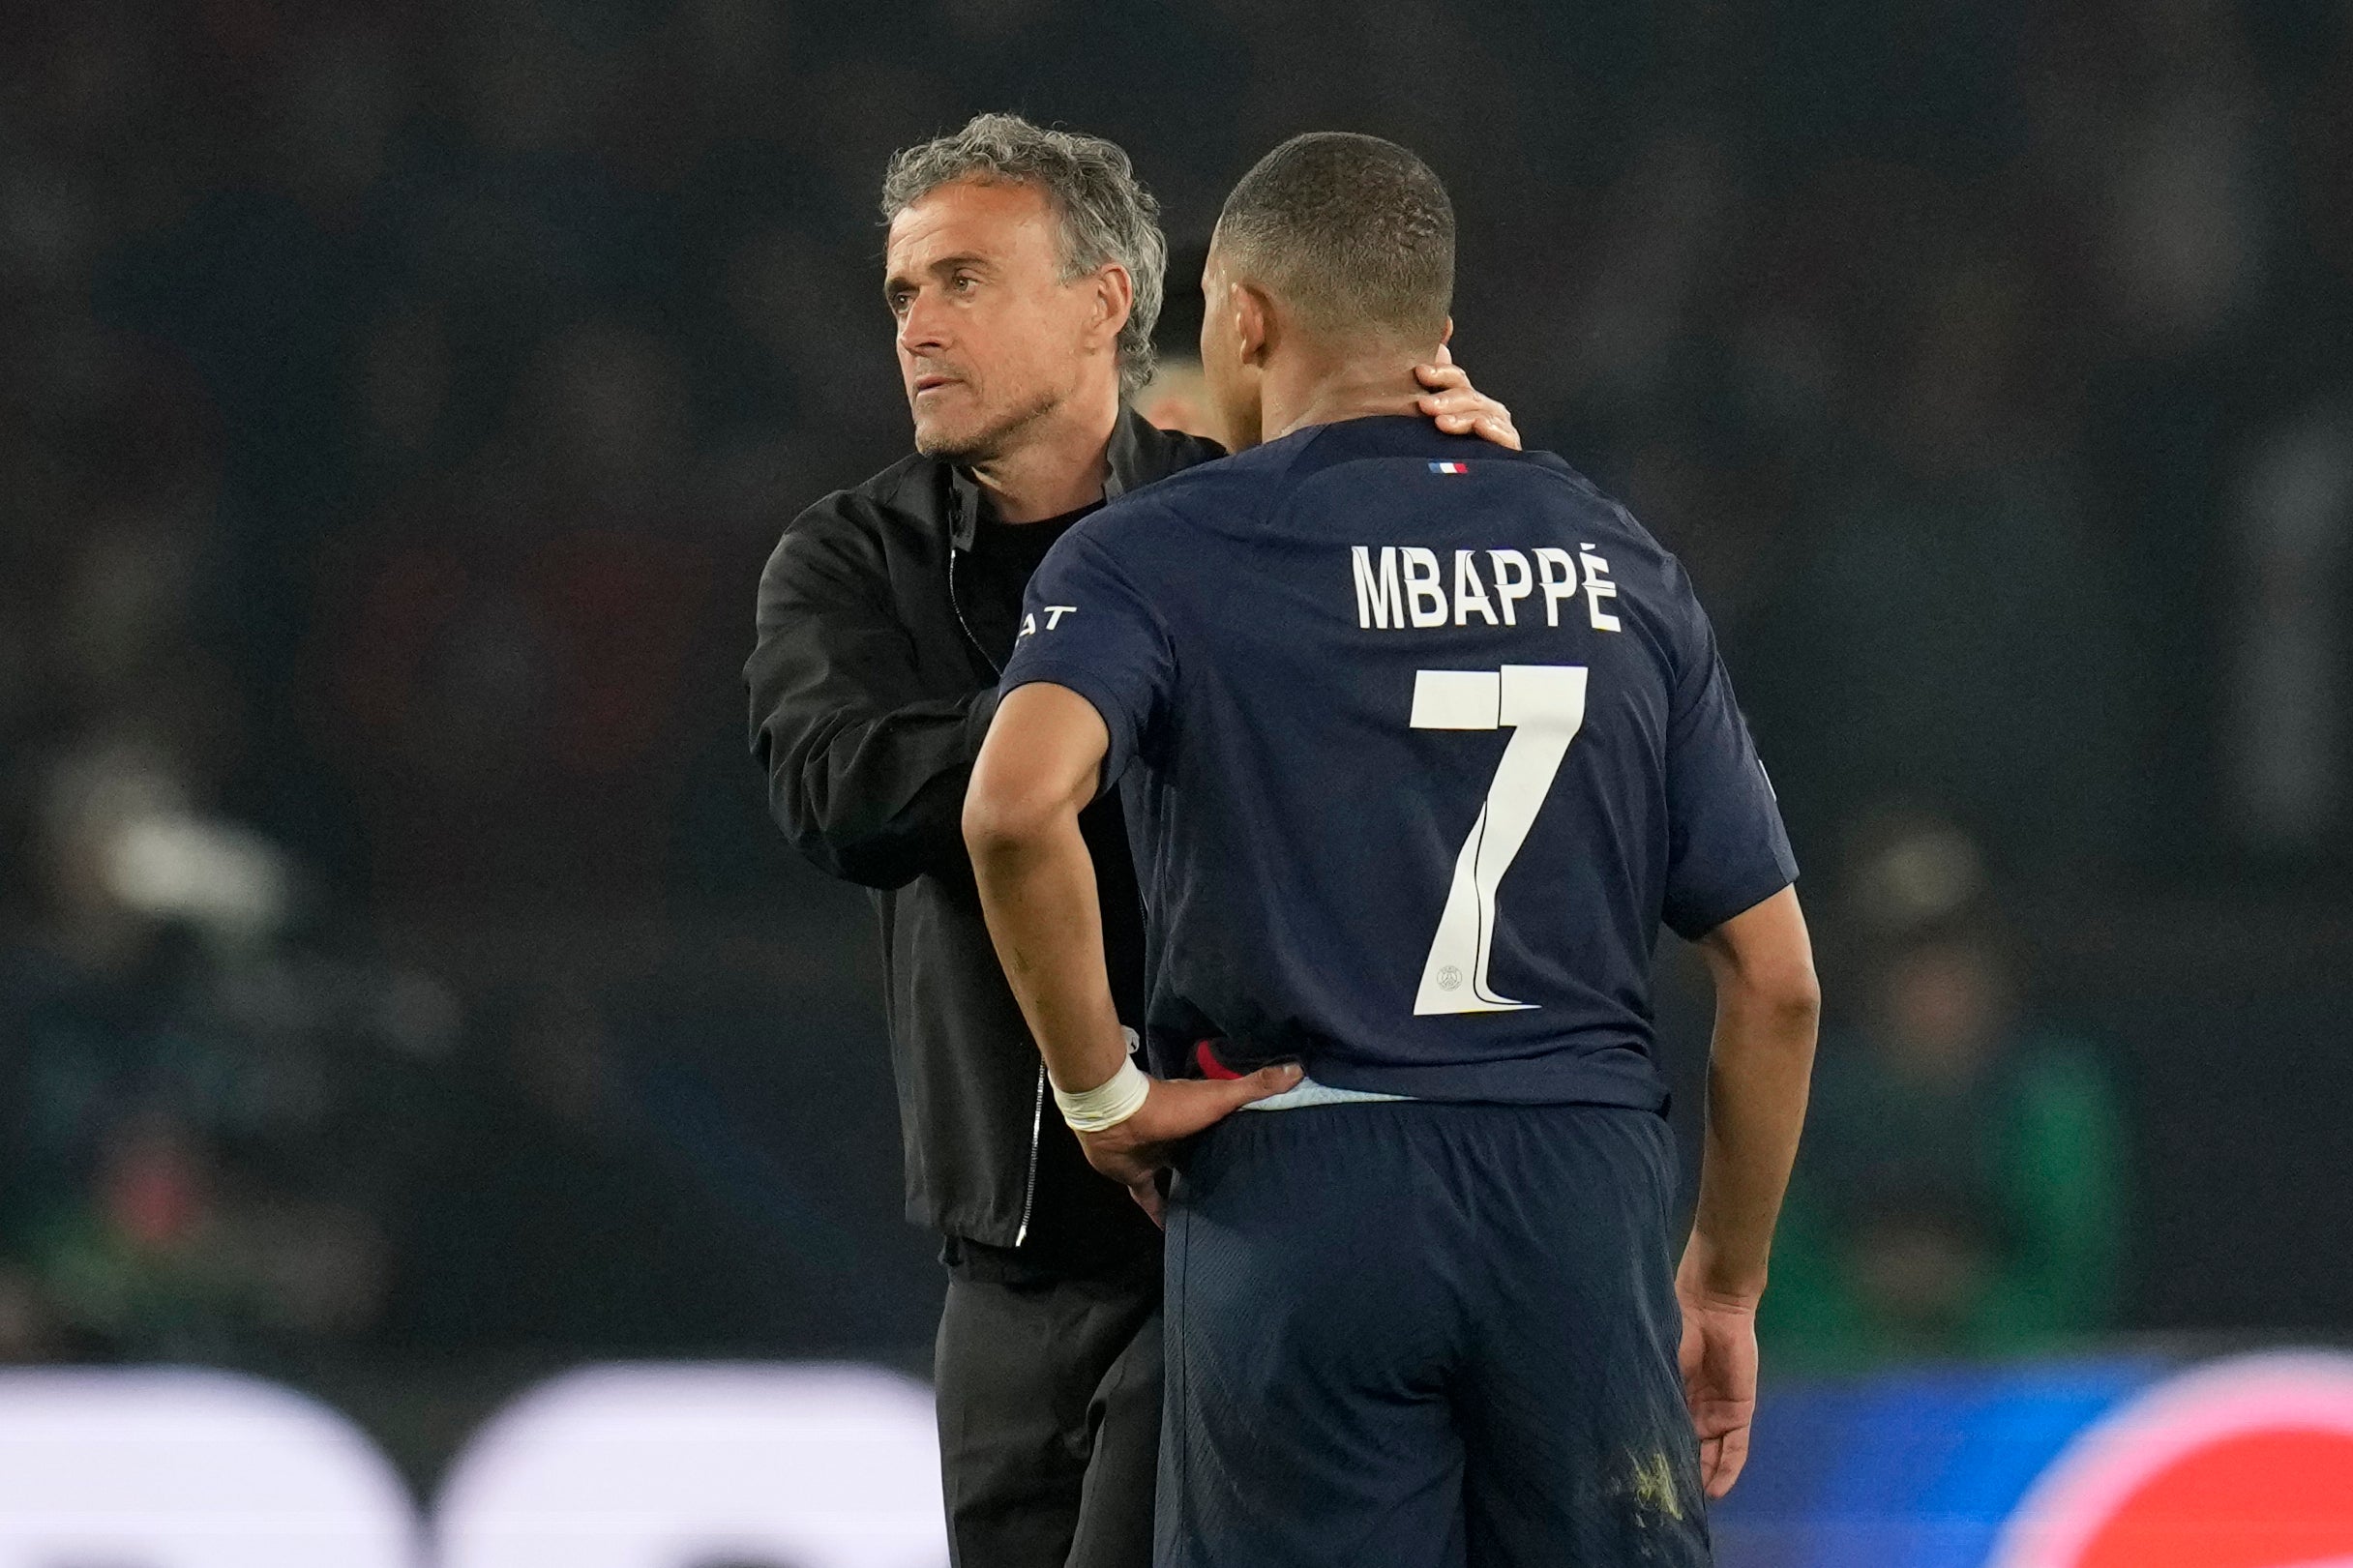 Mbappe was consoled by manager Luis Enrique